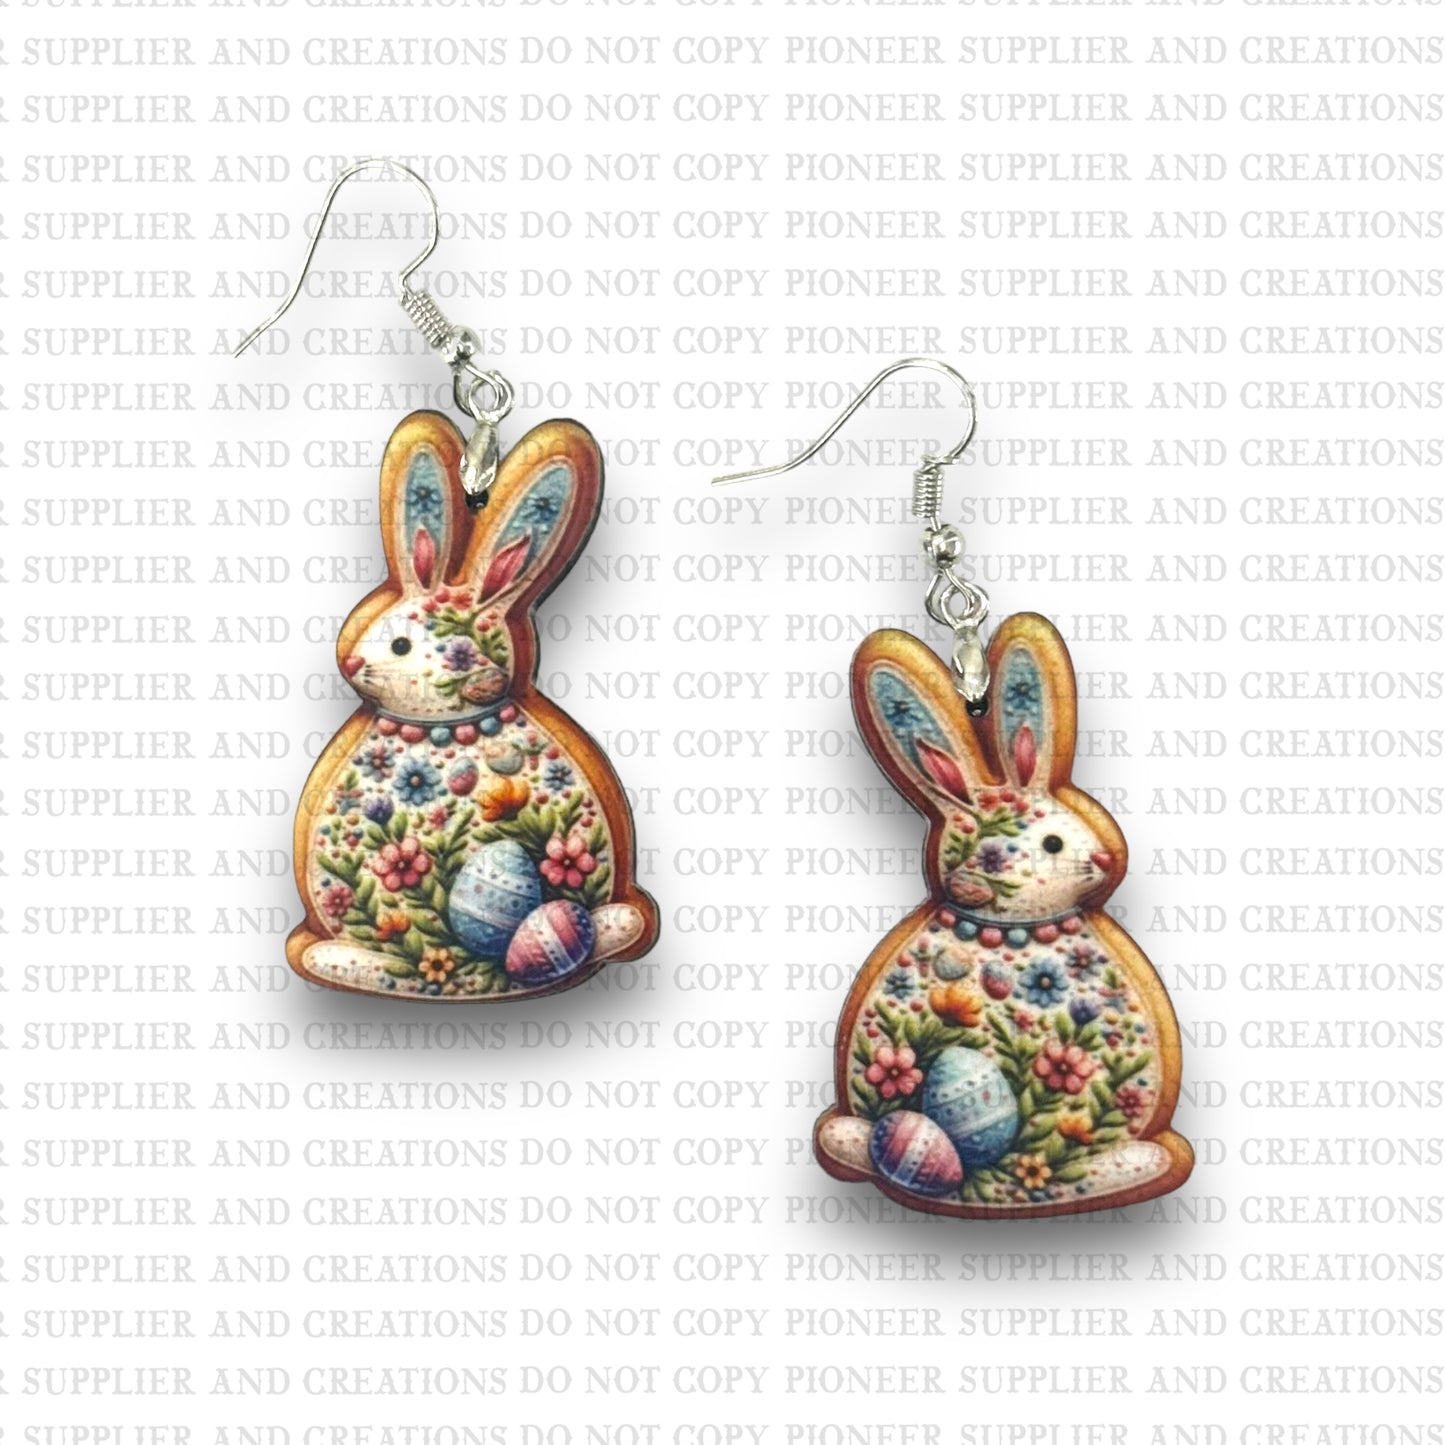 Bunny Cookie Earring Sublimation Blank Kit (w/ transfers and hardware) | Exclusive